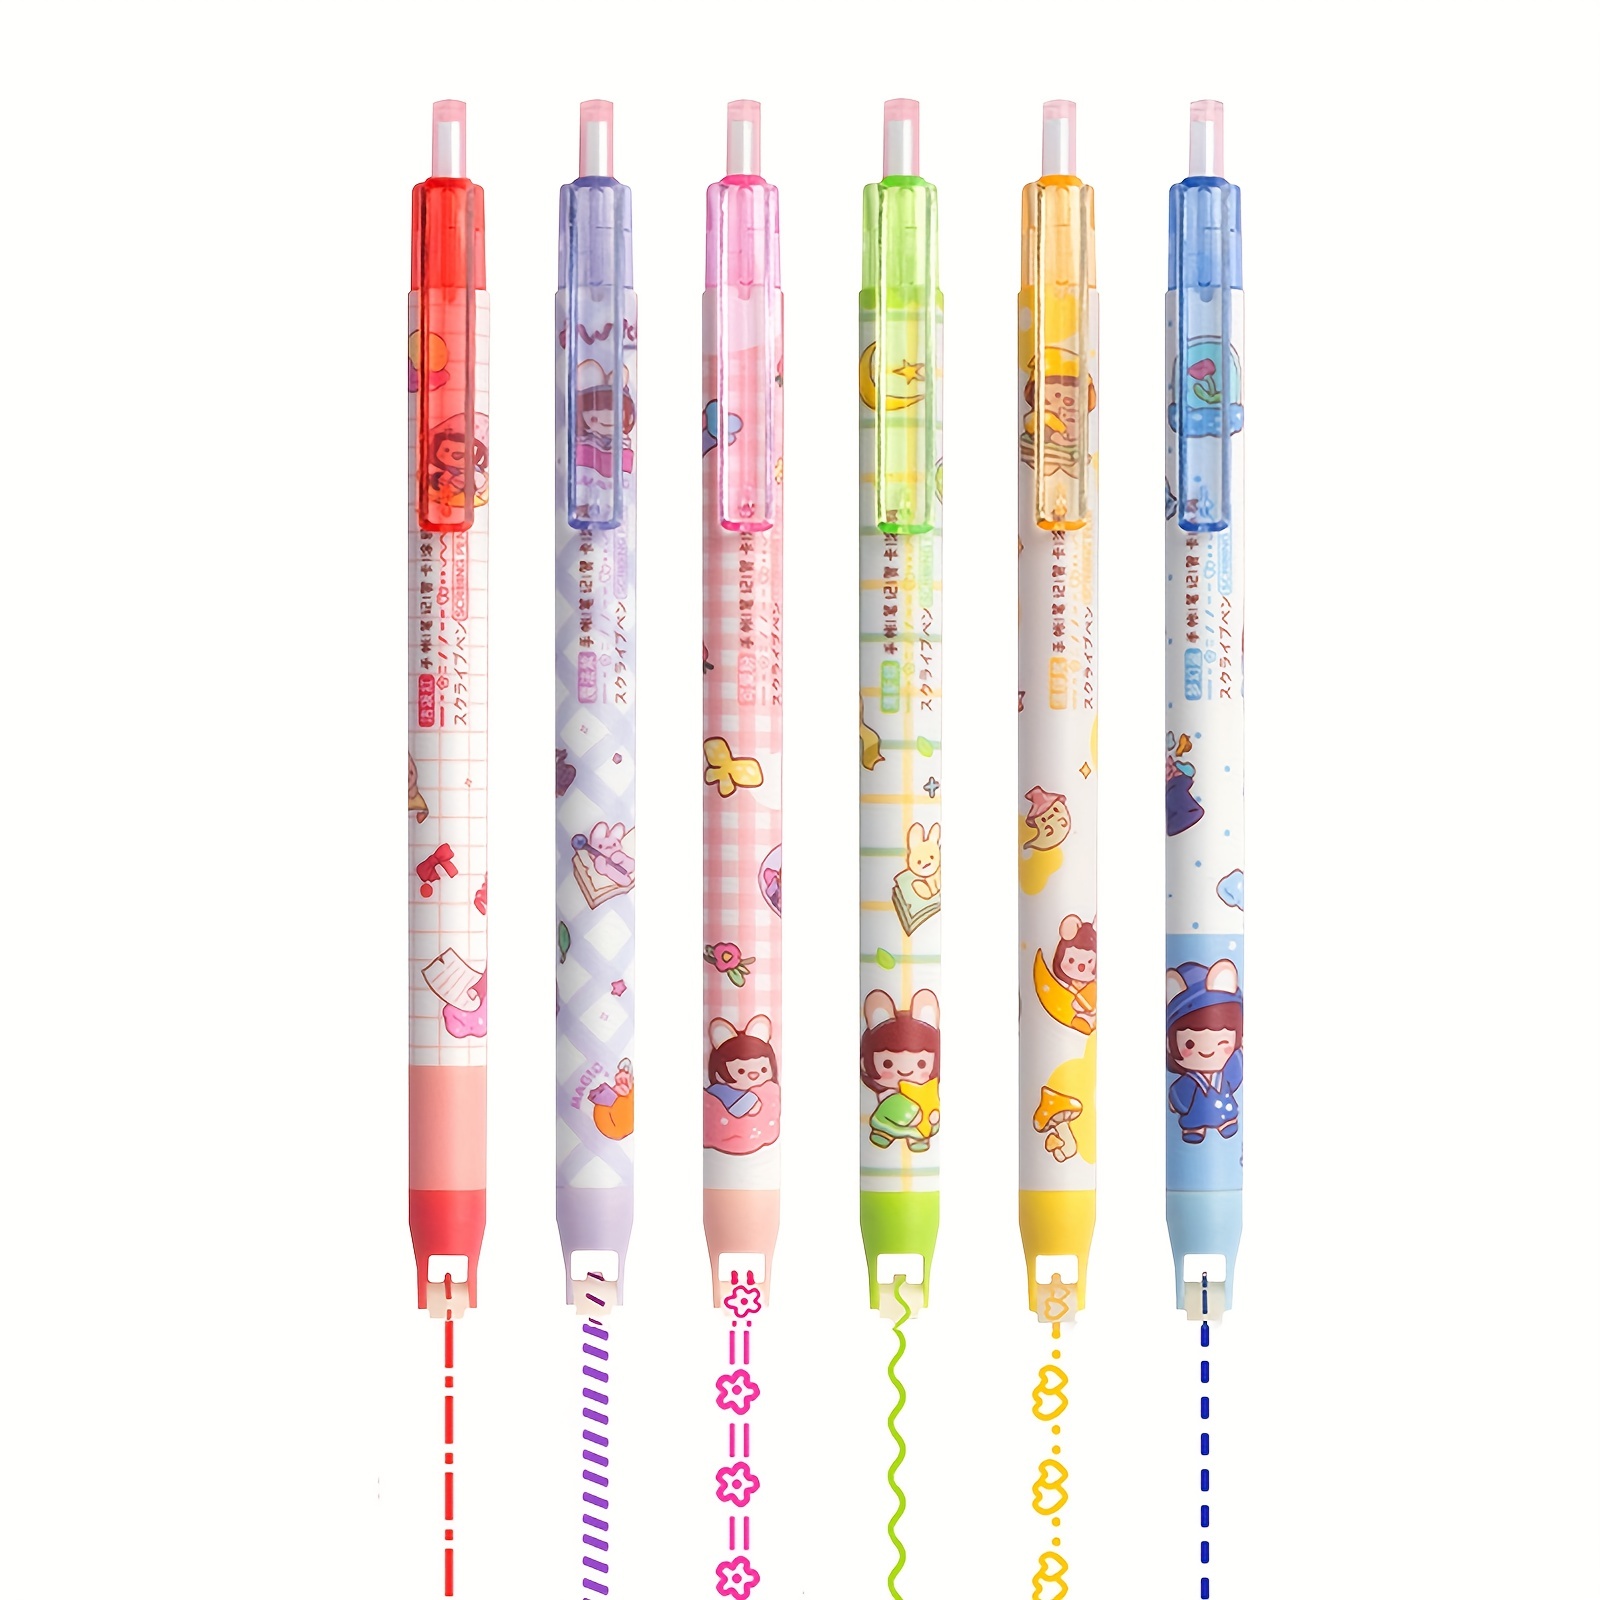 3/6pcs Colorful Cute Pattern Lace Quick Dry Highlighter Linear Pens For  Marking Decoration Material Handmade Craft DIY